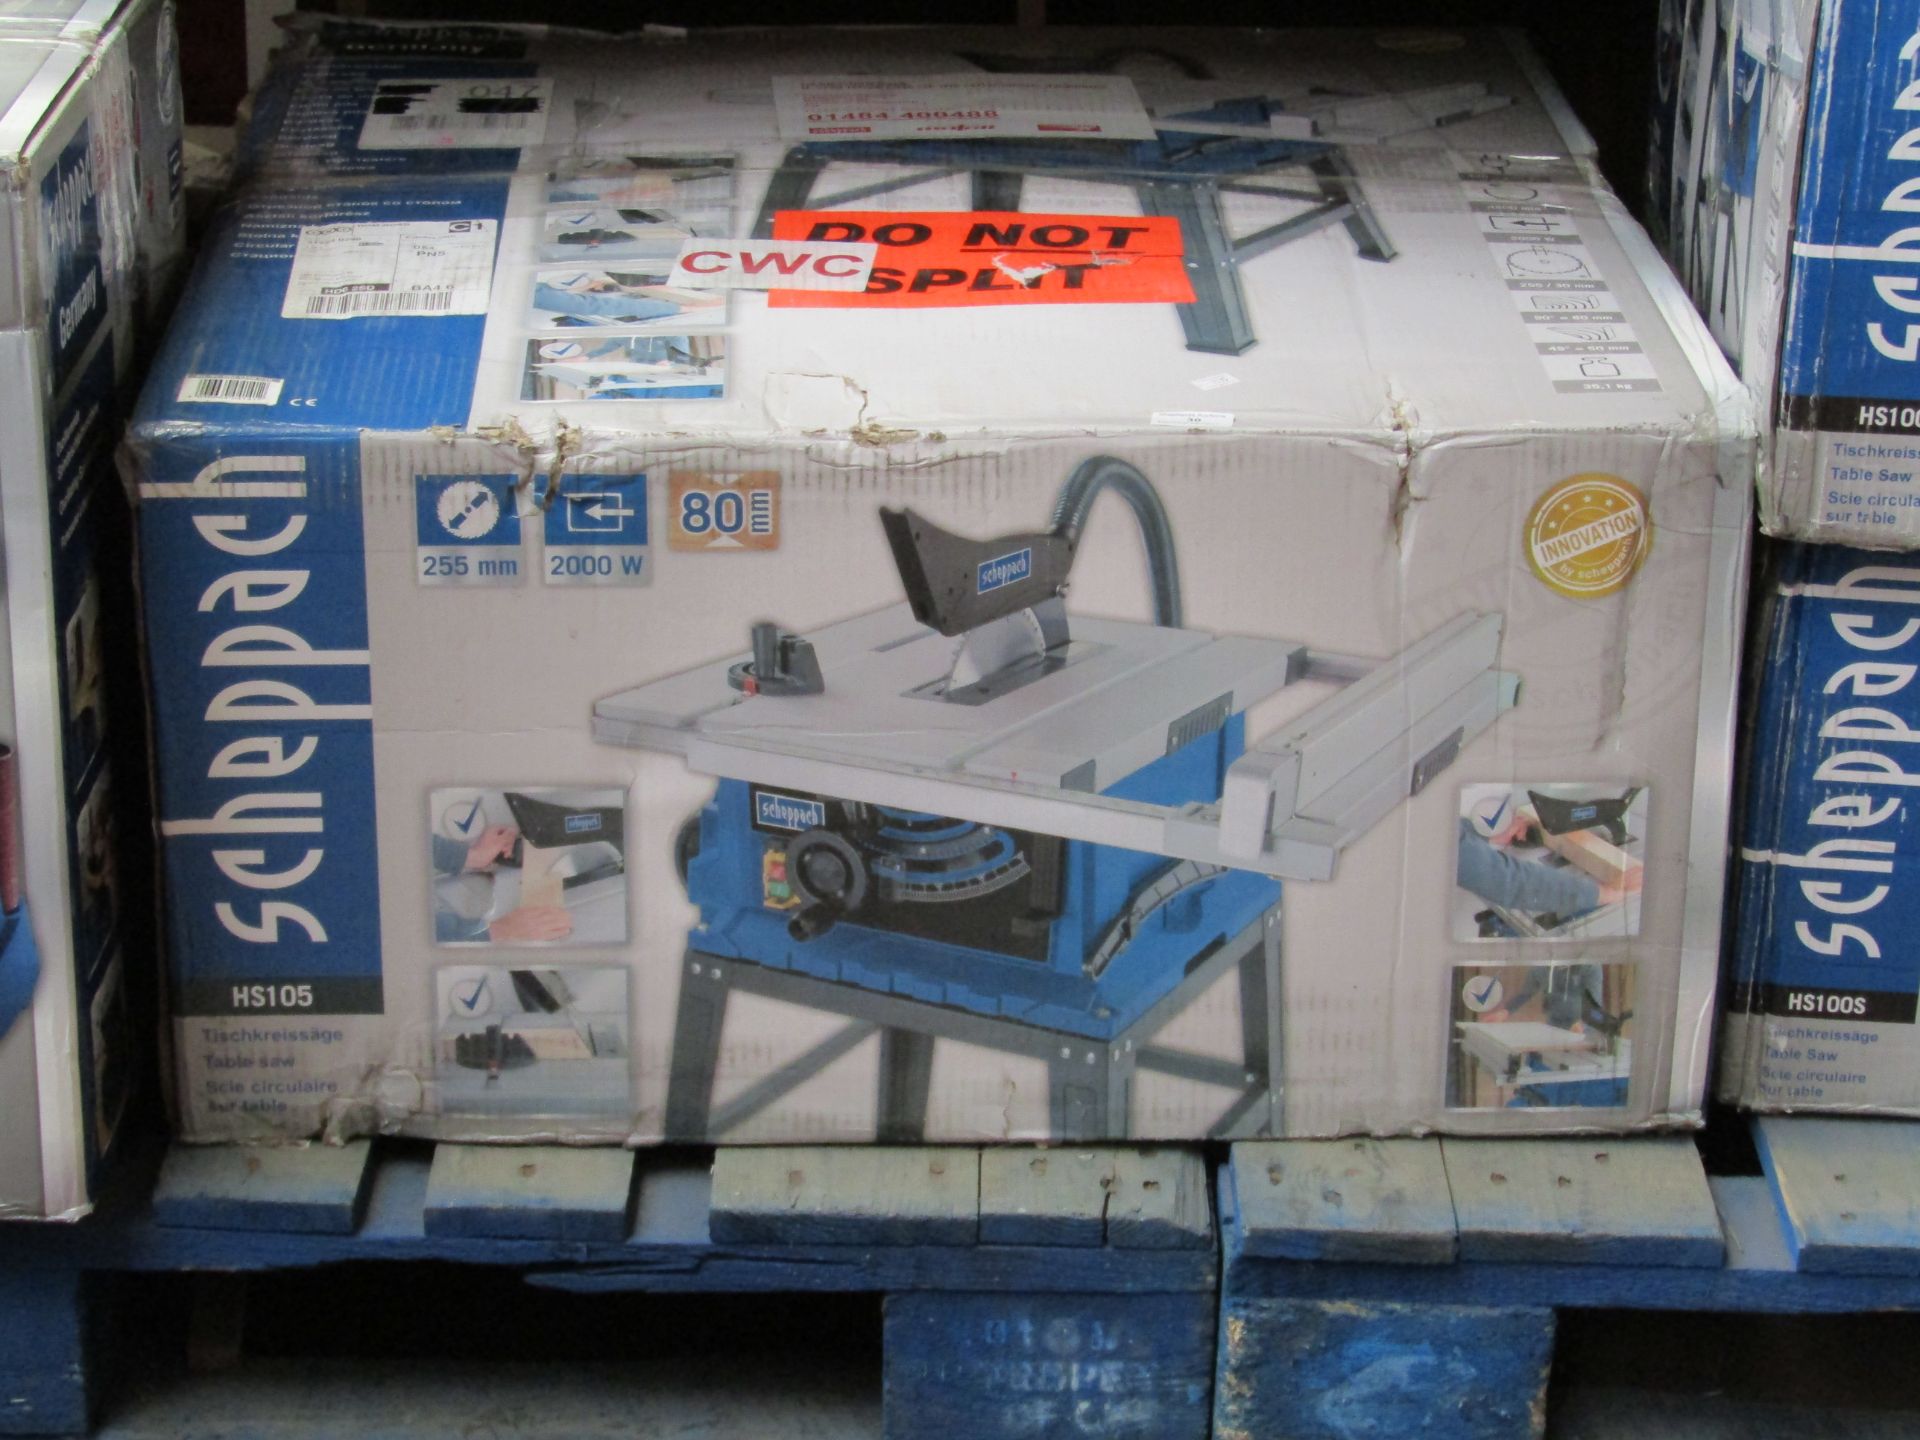 Scheppach HS105 255mm 230v Table saw, tested working and boxed, RRP £249.99